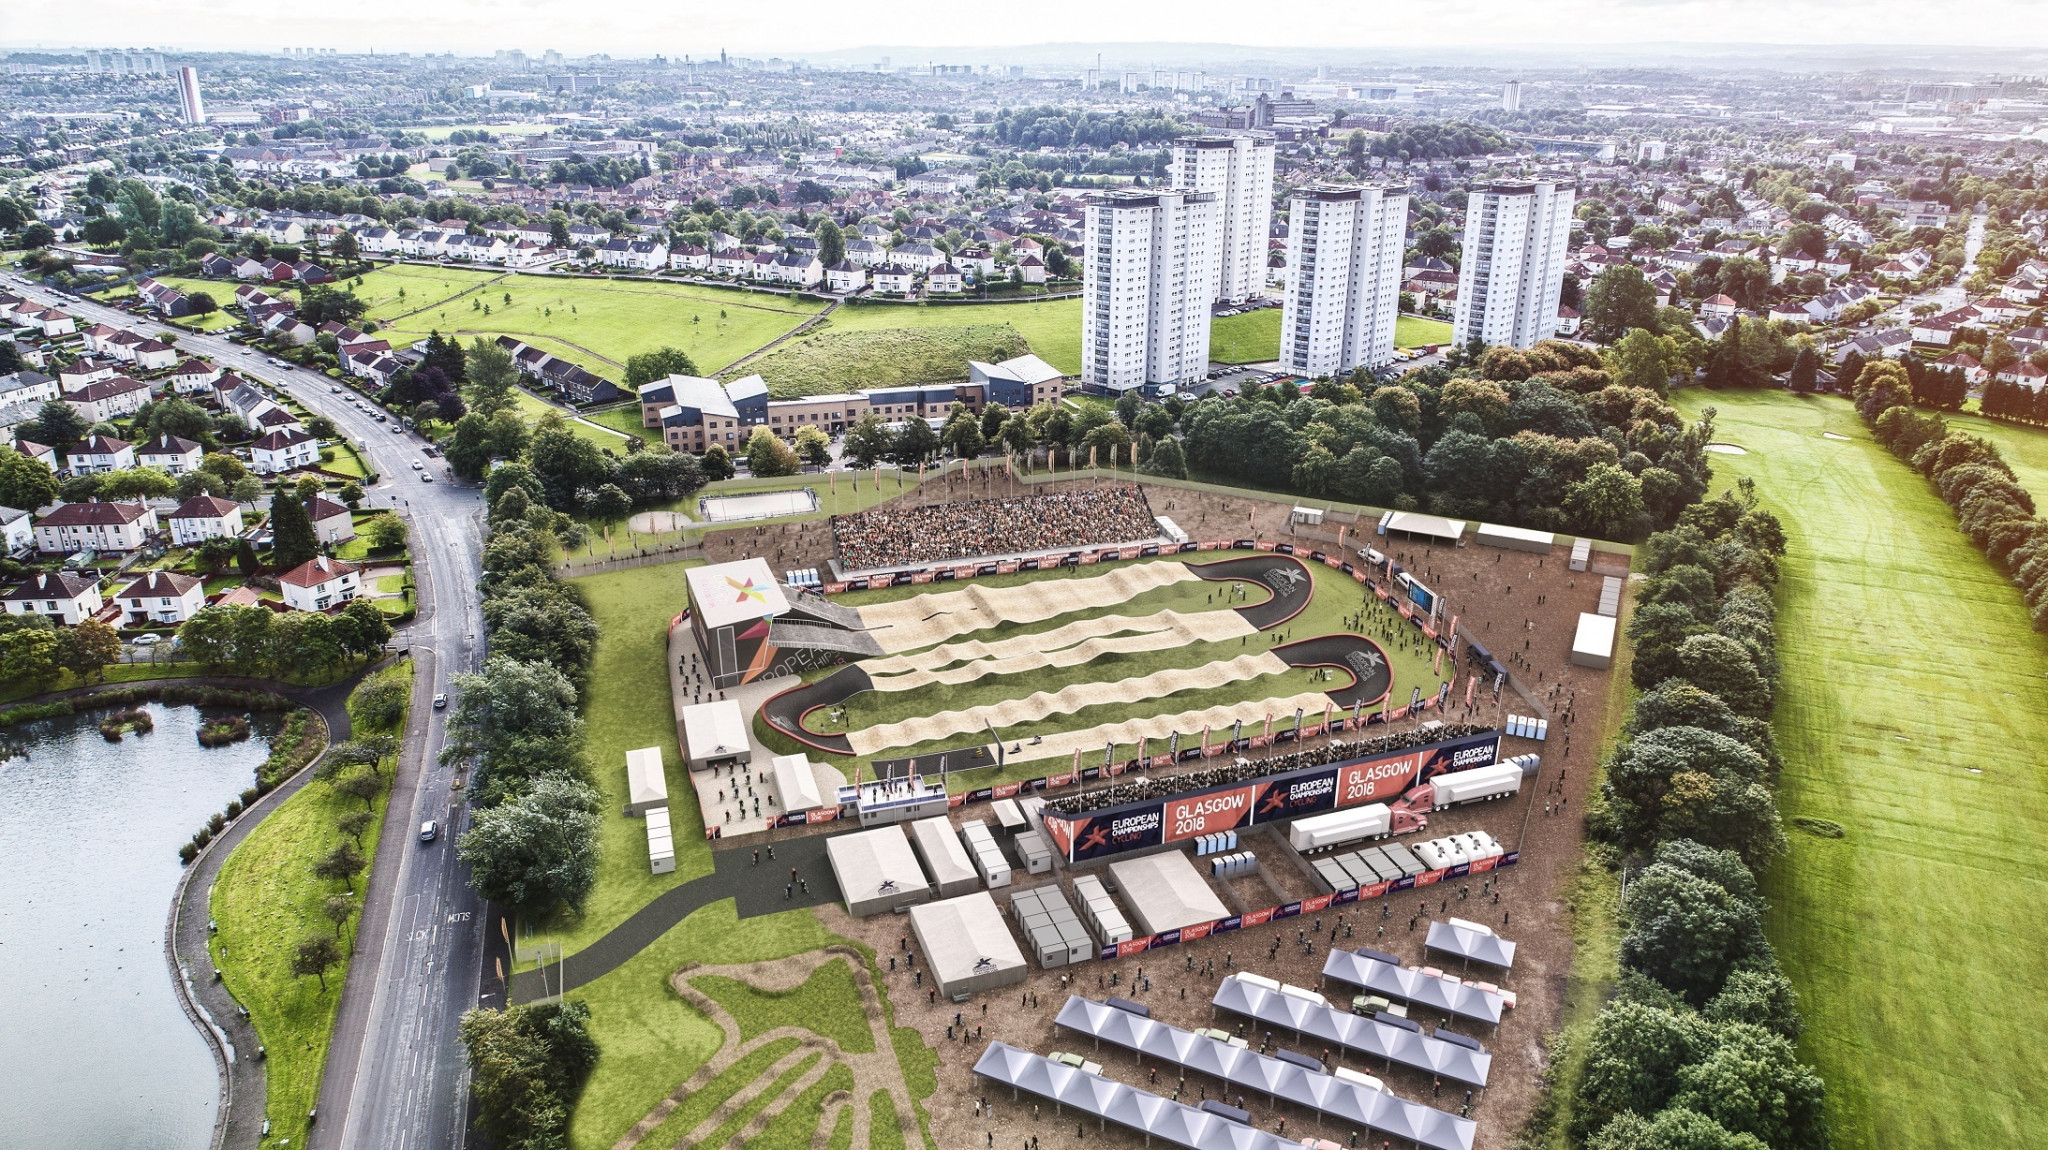 Construction starts on BMX Centre as preparations continue for Glasgow 2018 European Championships